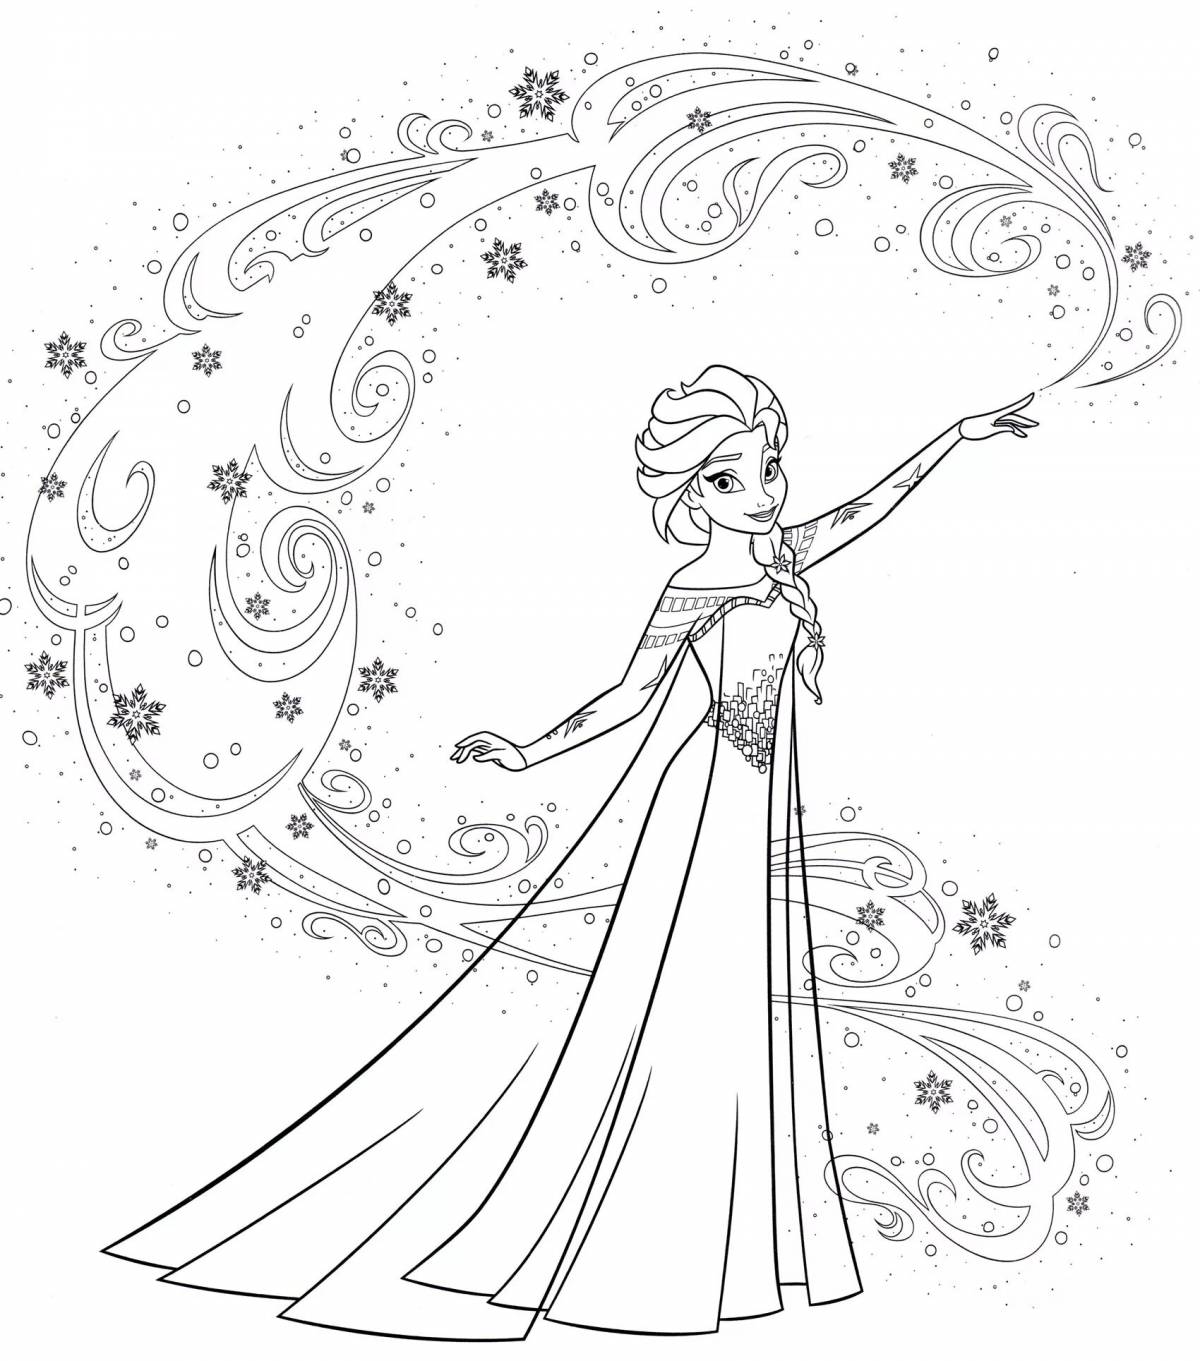 Elsa glitter coloring book for kids 6-7 years old